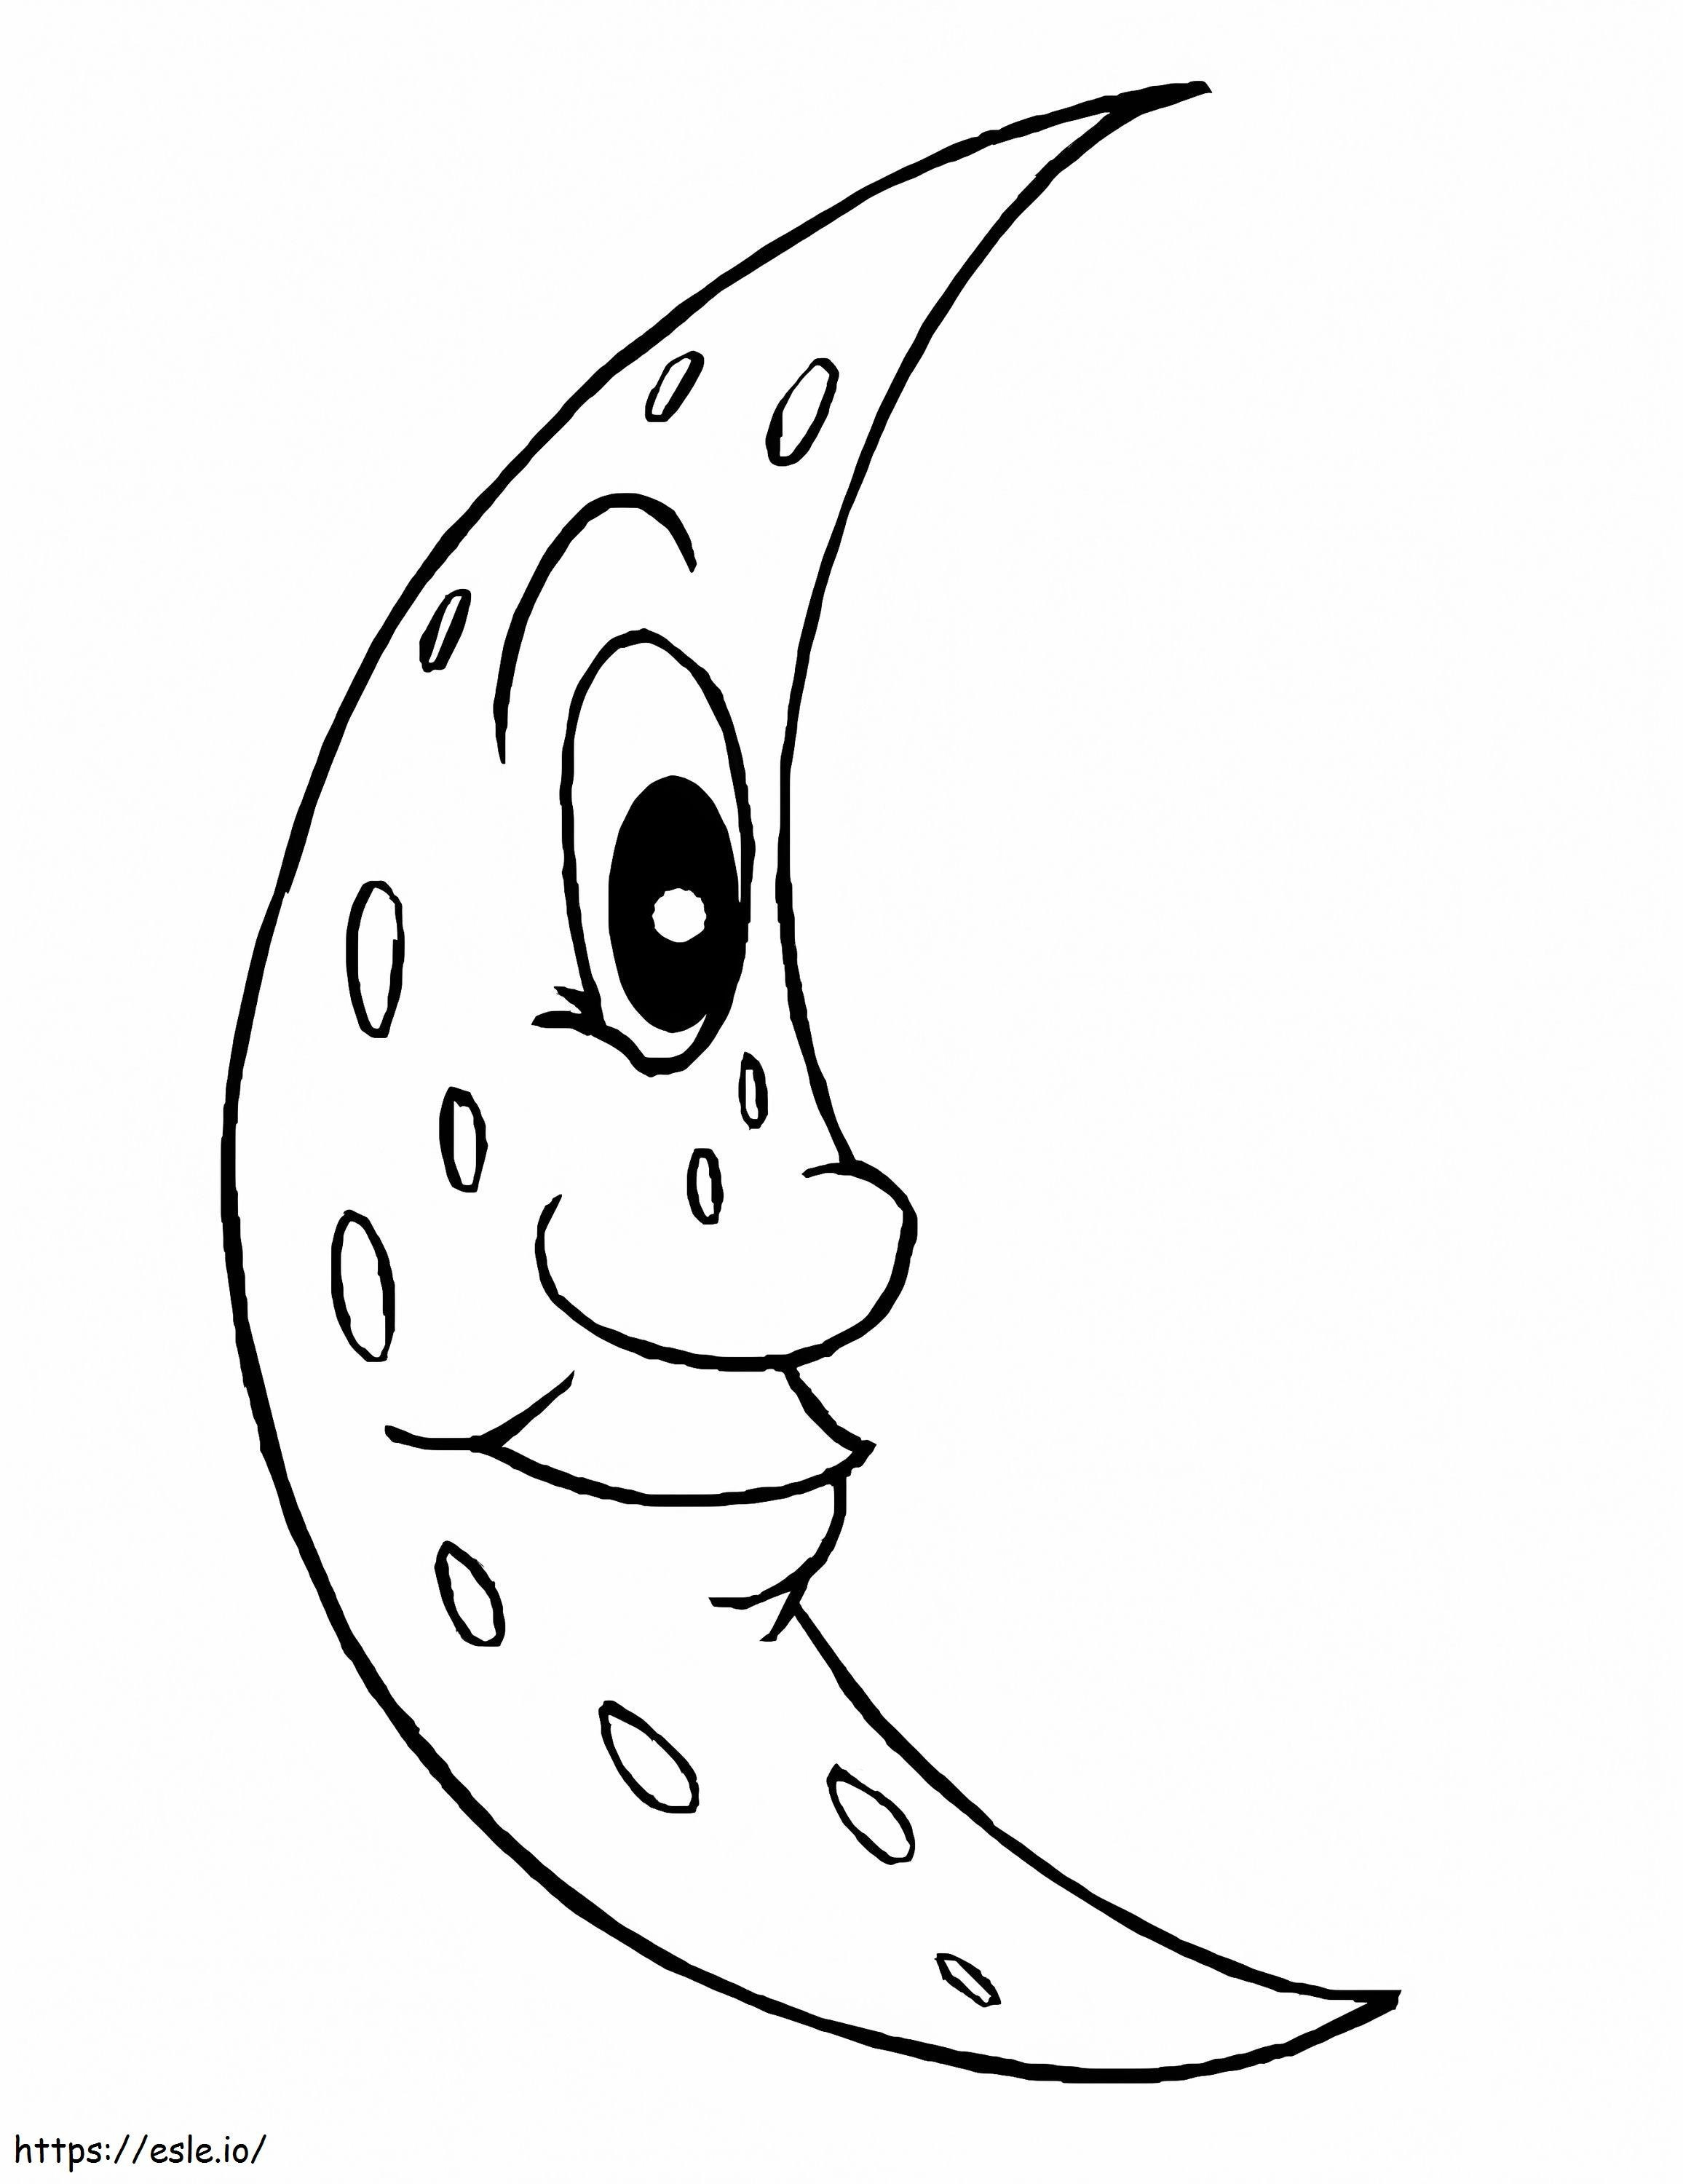 Moon Like Cheese coloring page